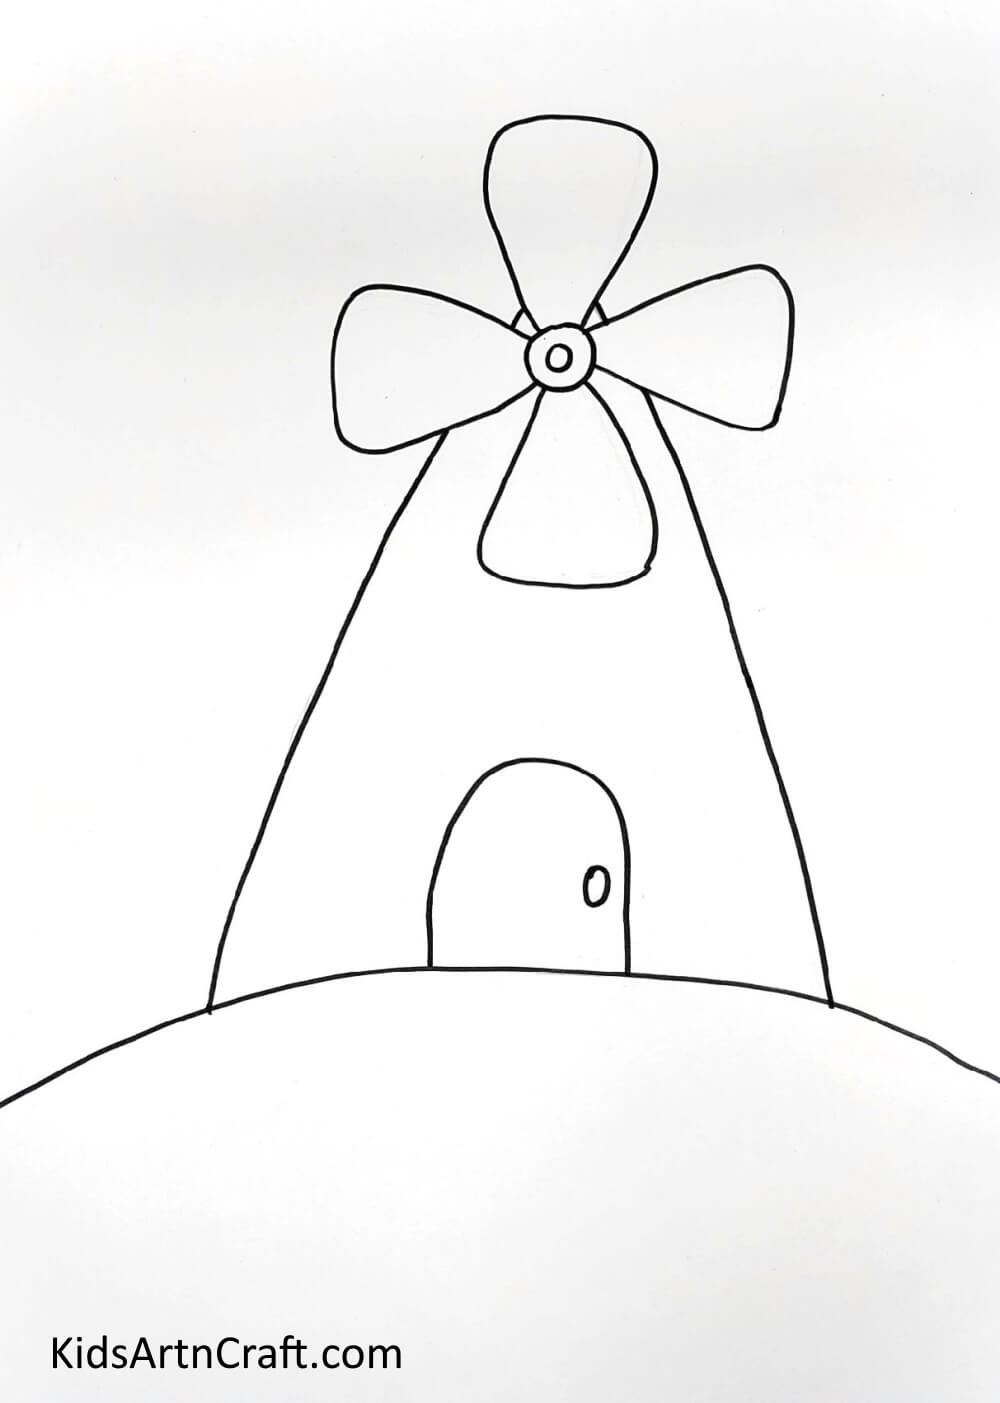 Drawing Windmill - Illustrating and Coloring a Windmill: A Guide for Kids